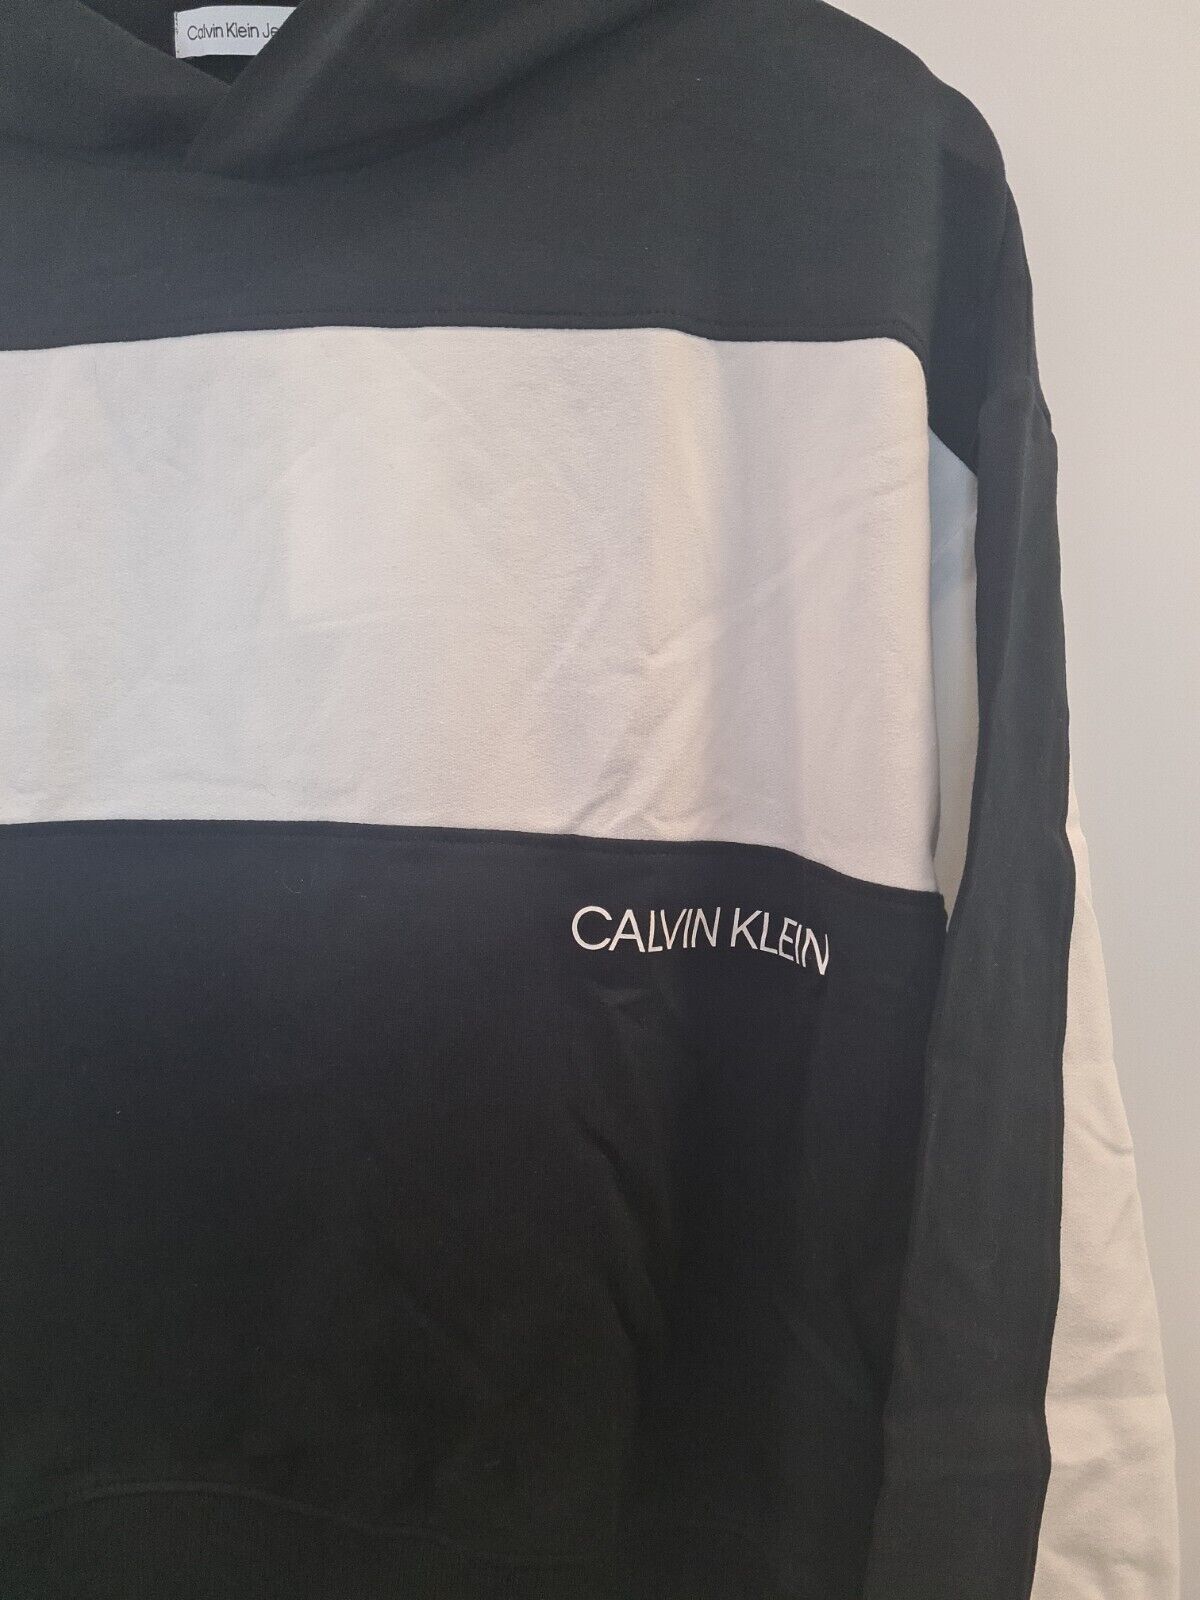 Calvin Klein Boys Relaxed Colour Block Hoodie Size 16 Years **** V143